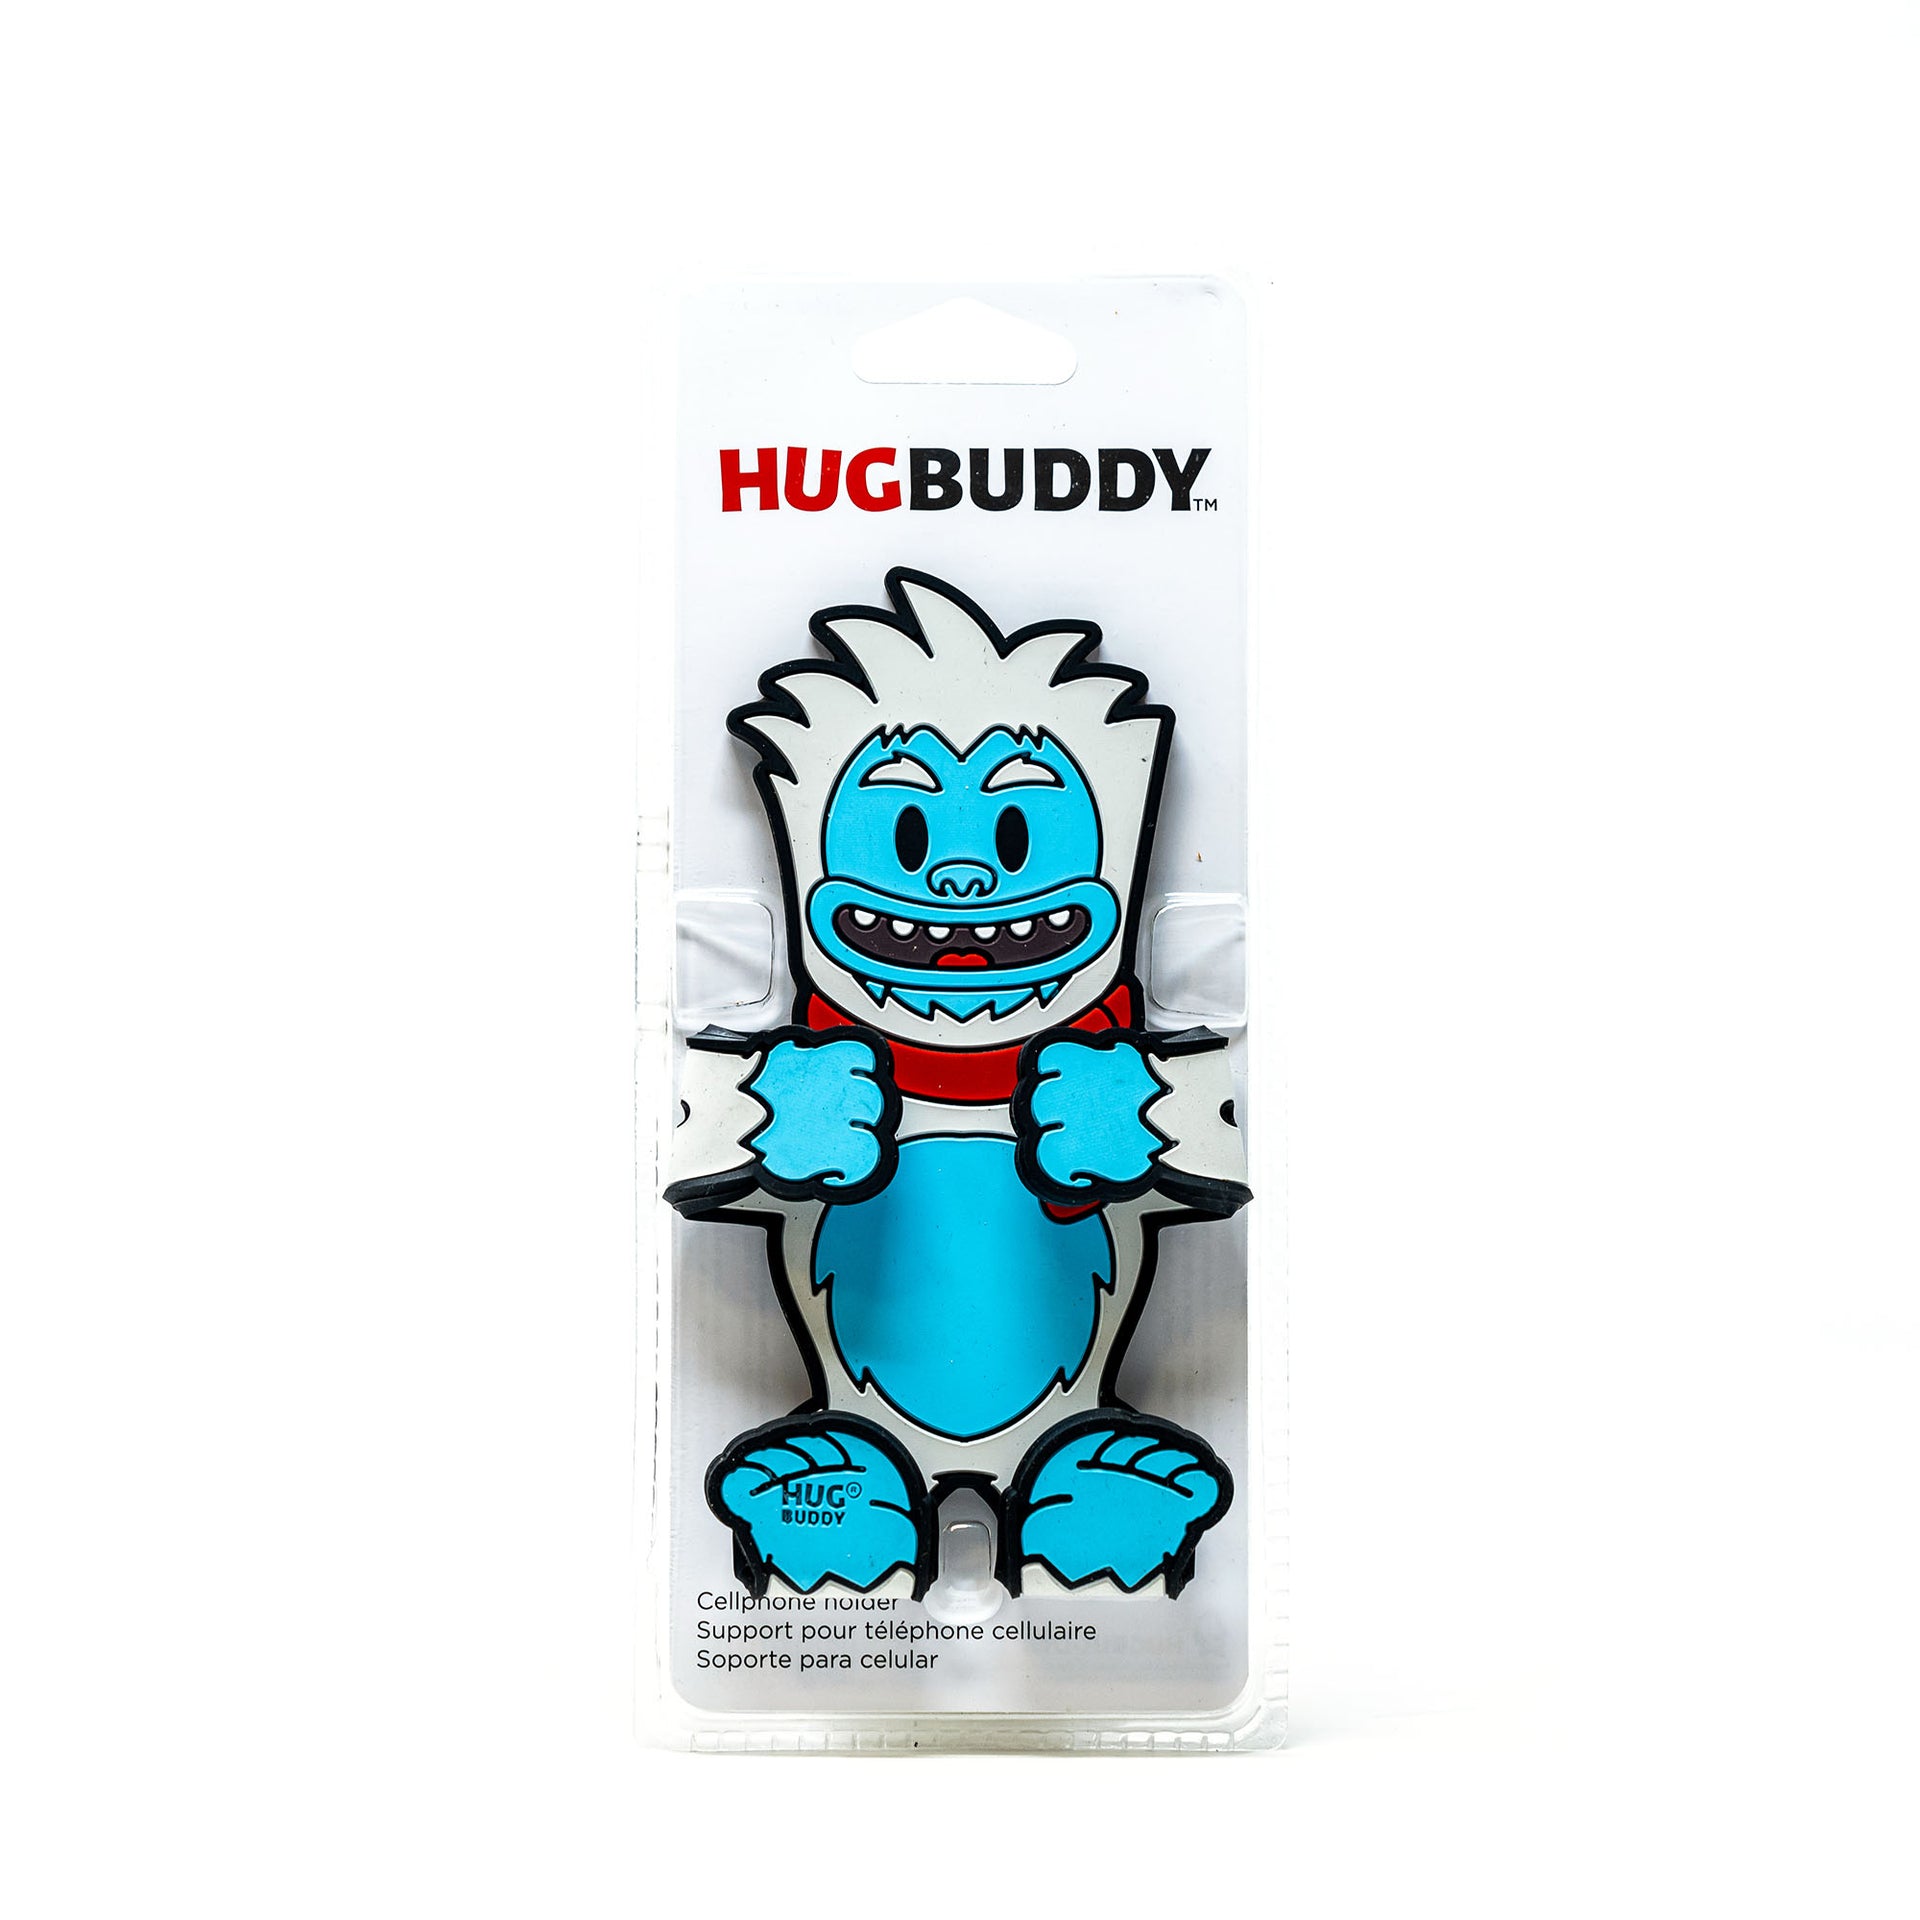 Image of the Yeti Hug Buddy packaging front view